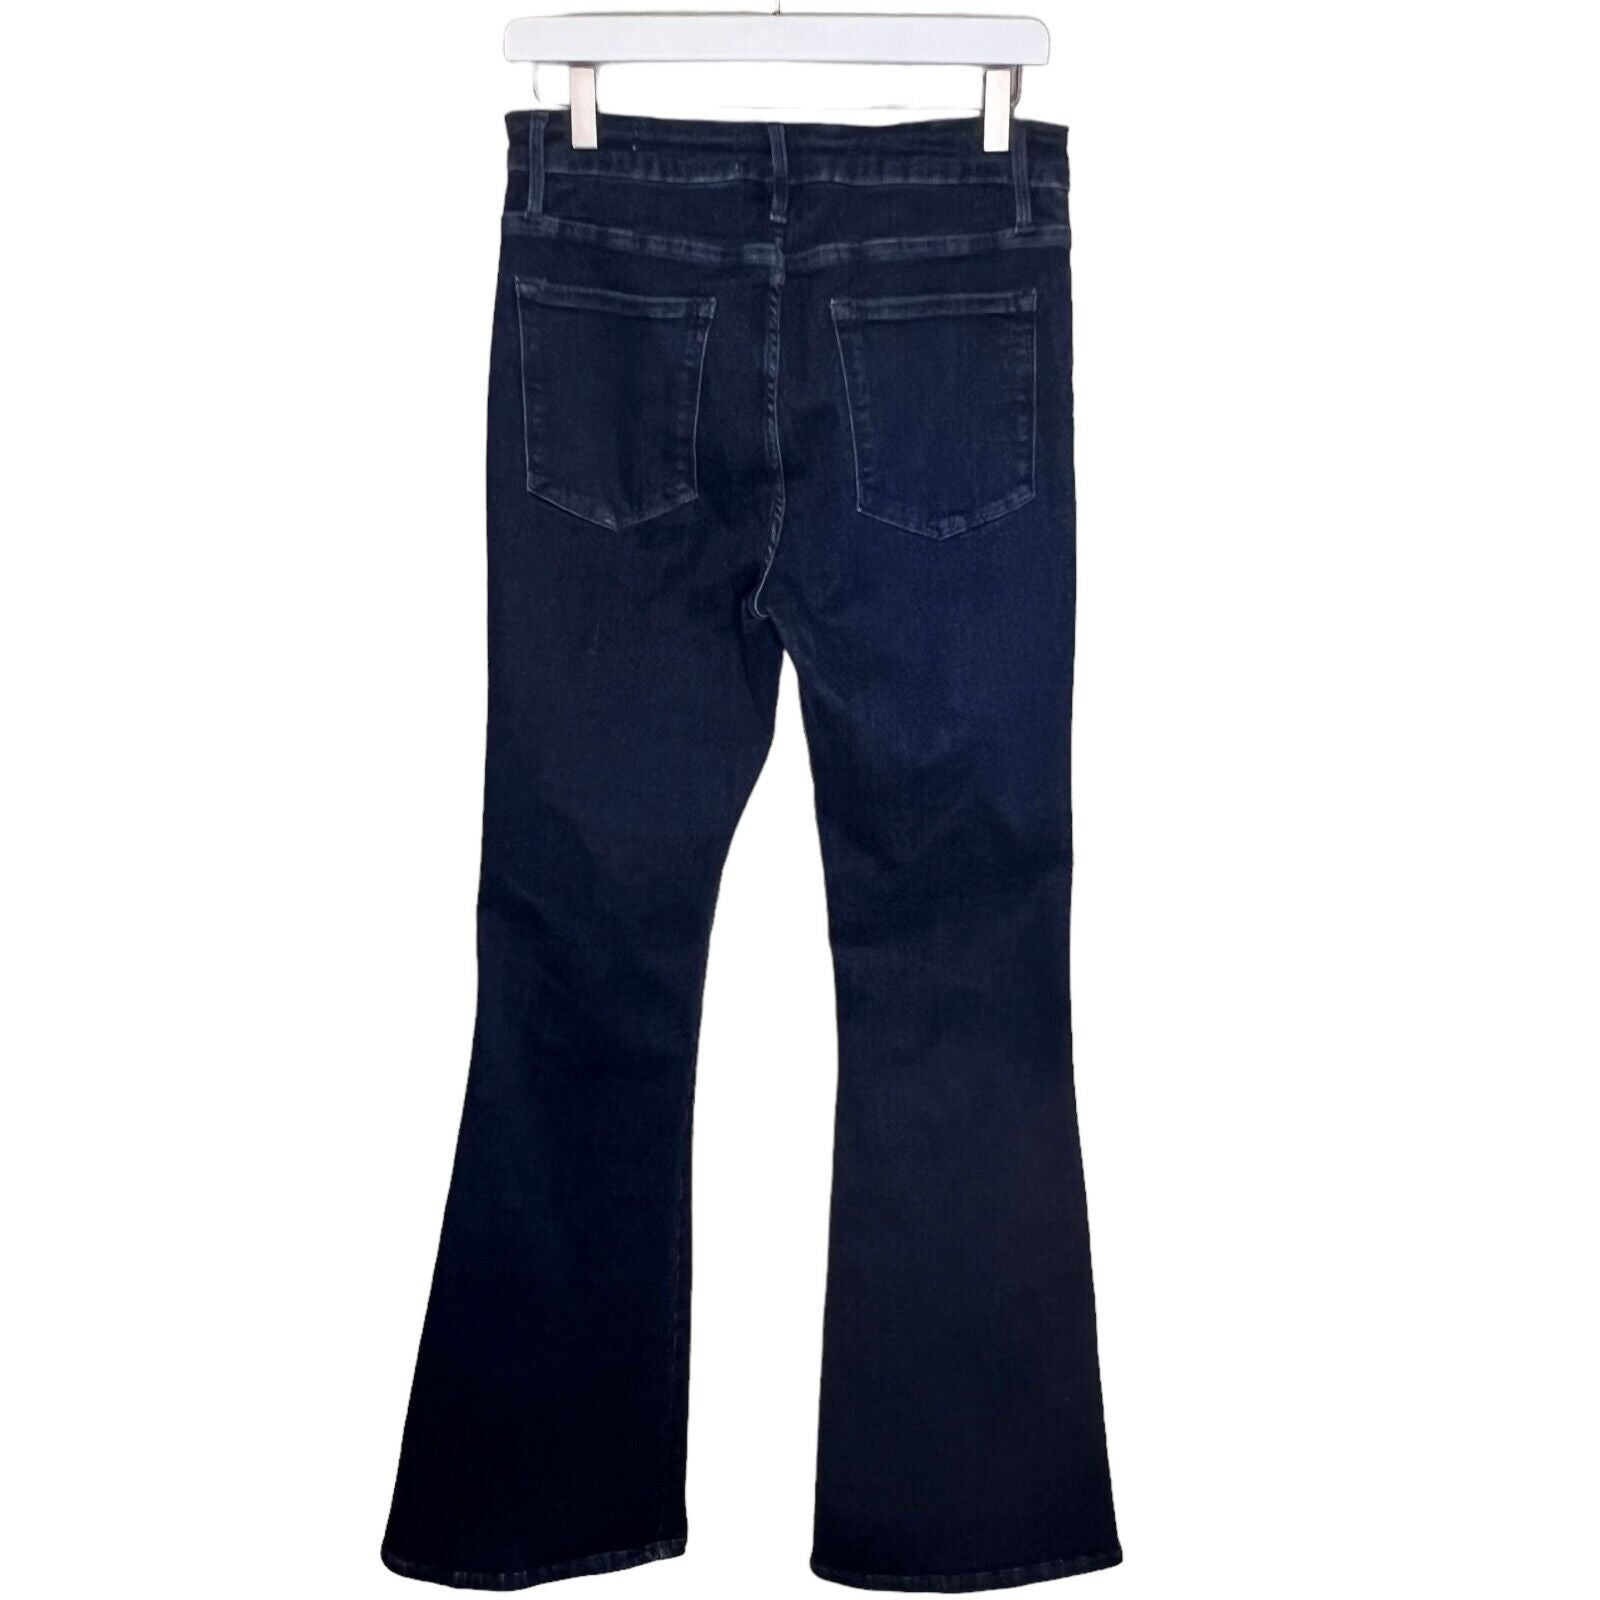 FRAME Le One High-Rise Flare Jeans Size 2 (29-34) NEW $238